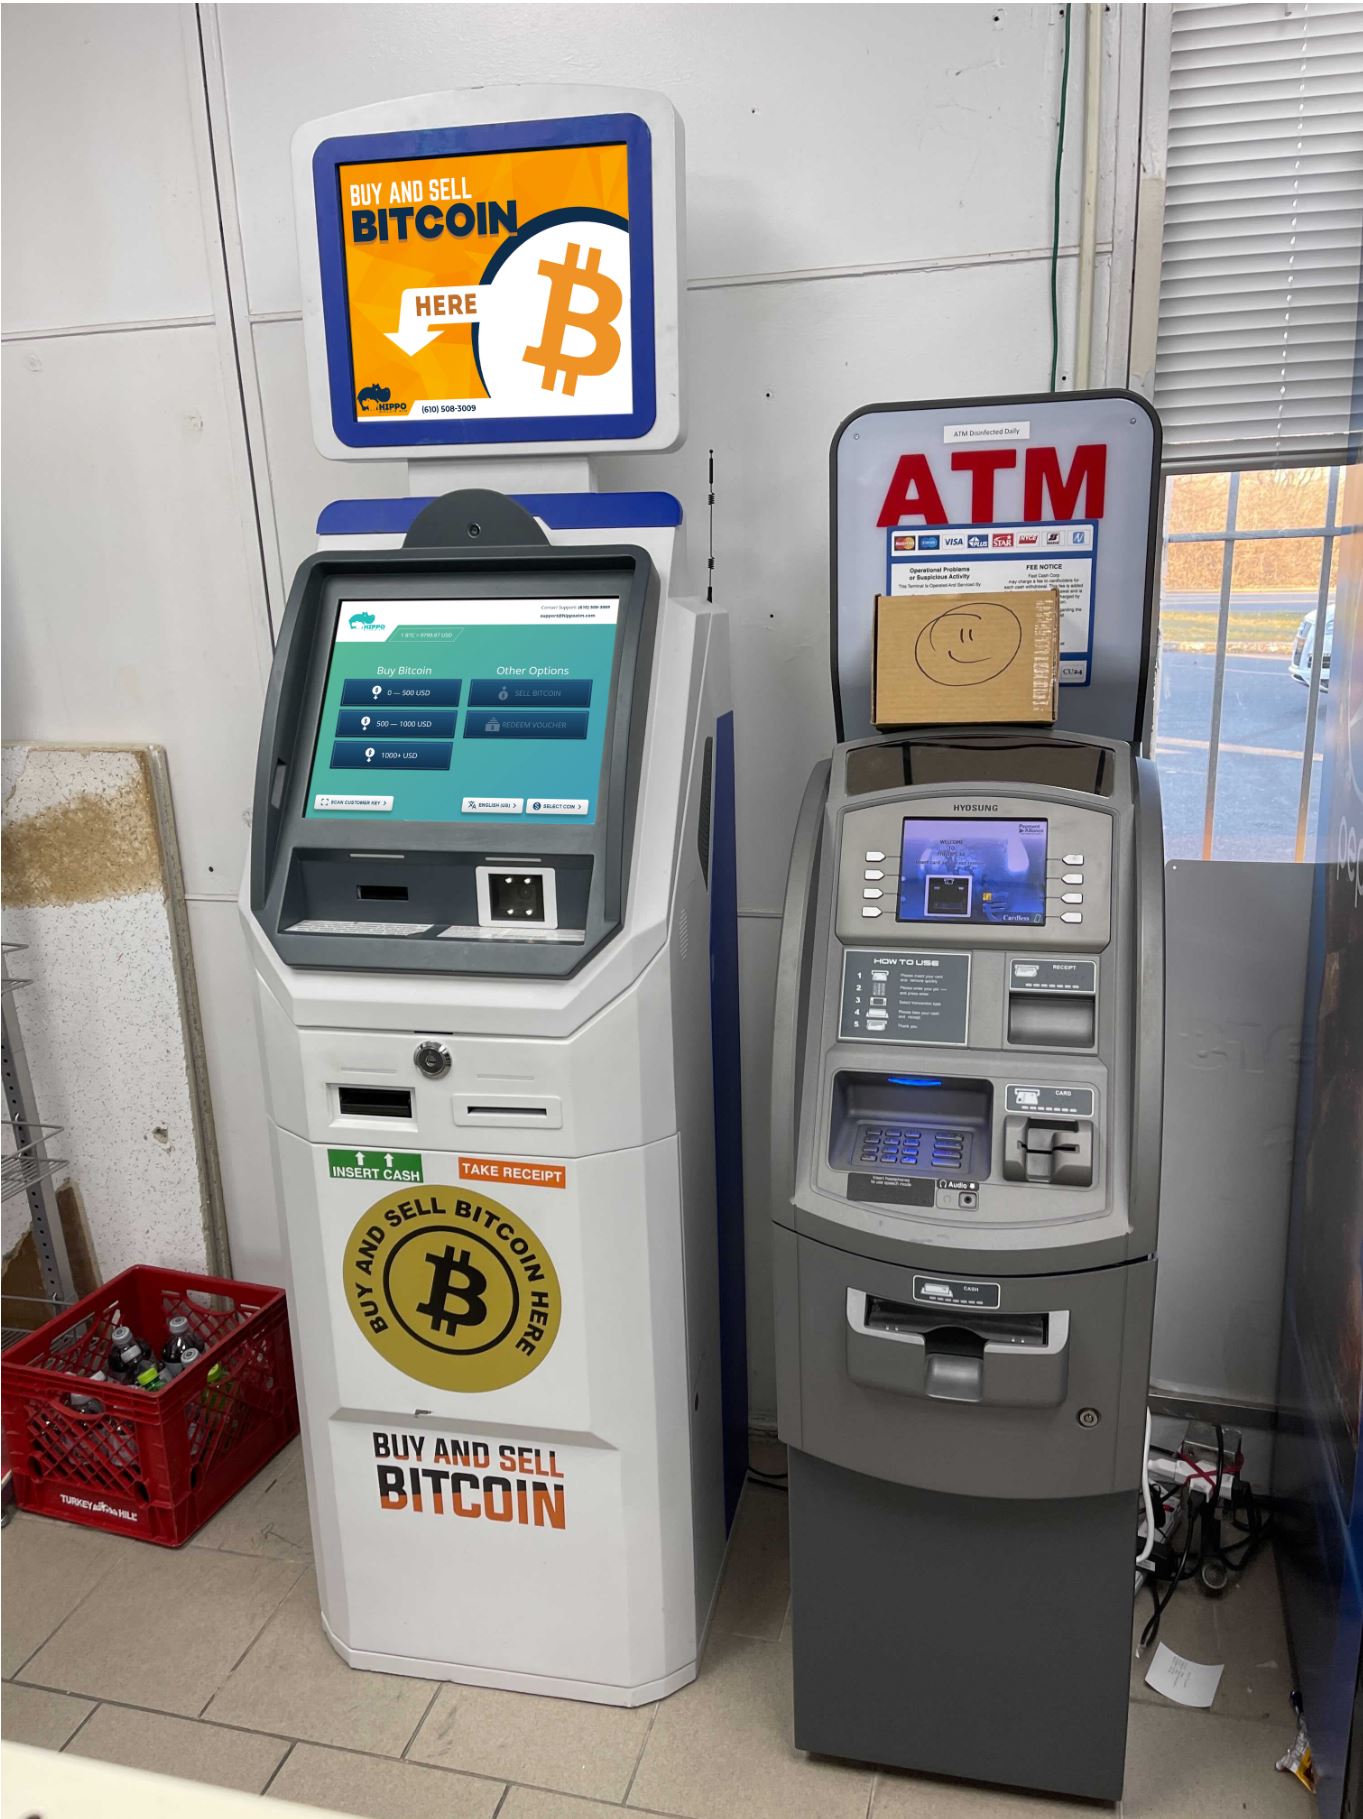 Bitcoin ATM in Easton PA lets you sell bitcoin or buy bitcoin for cash at Easton by Hippo bitcoin ATM manufactured by chainbytes